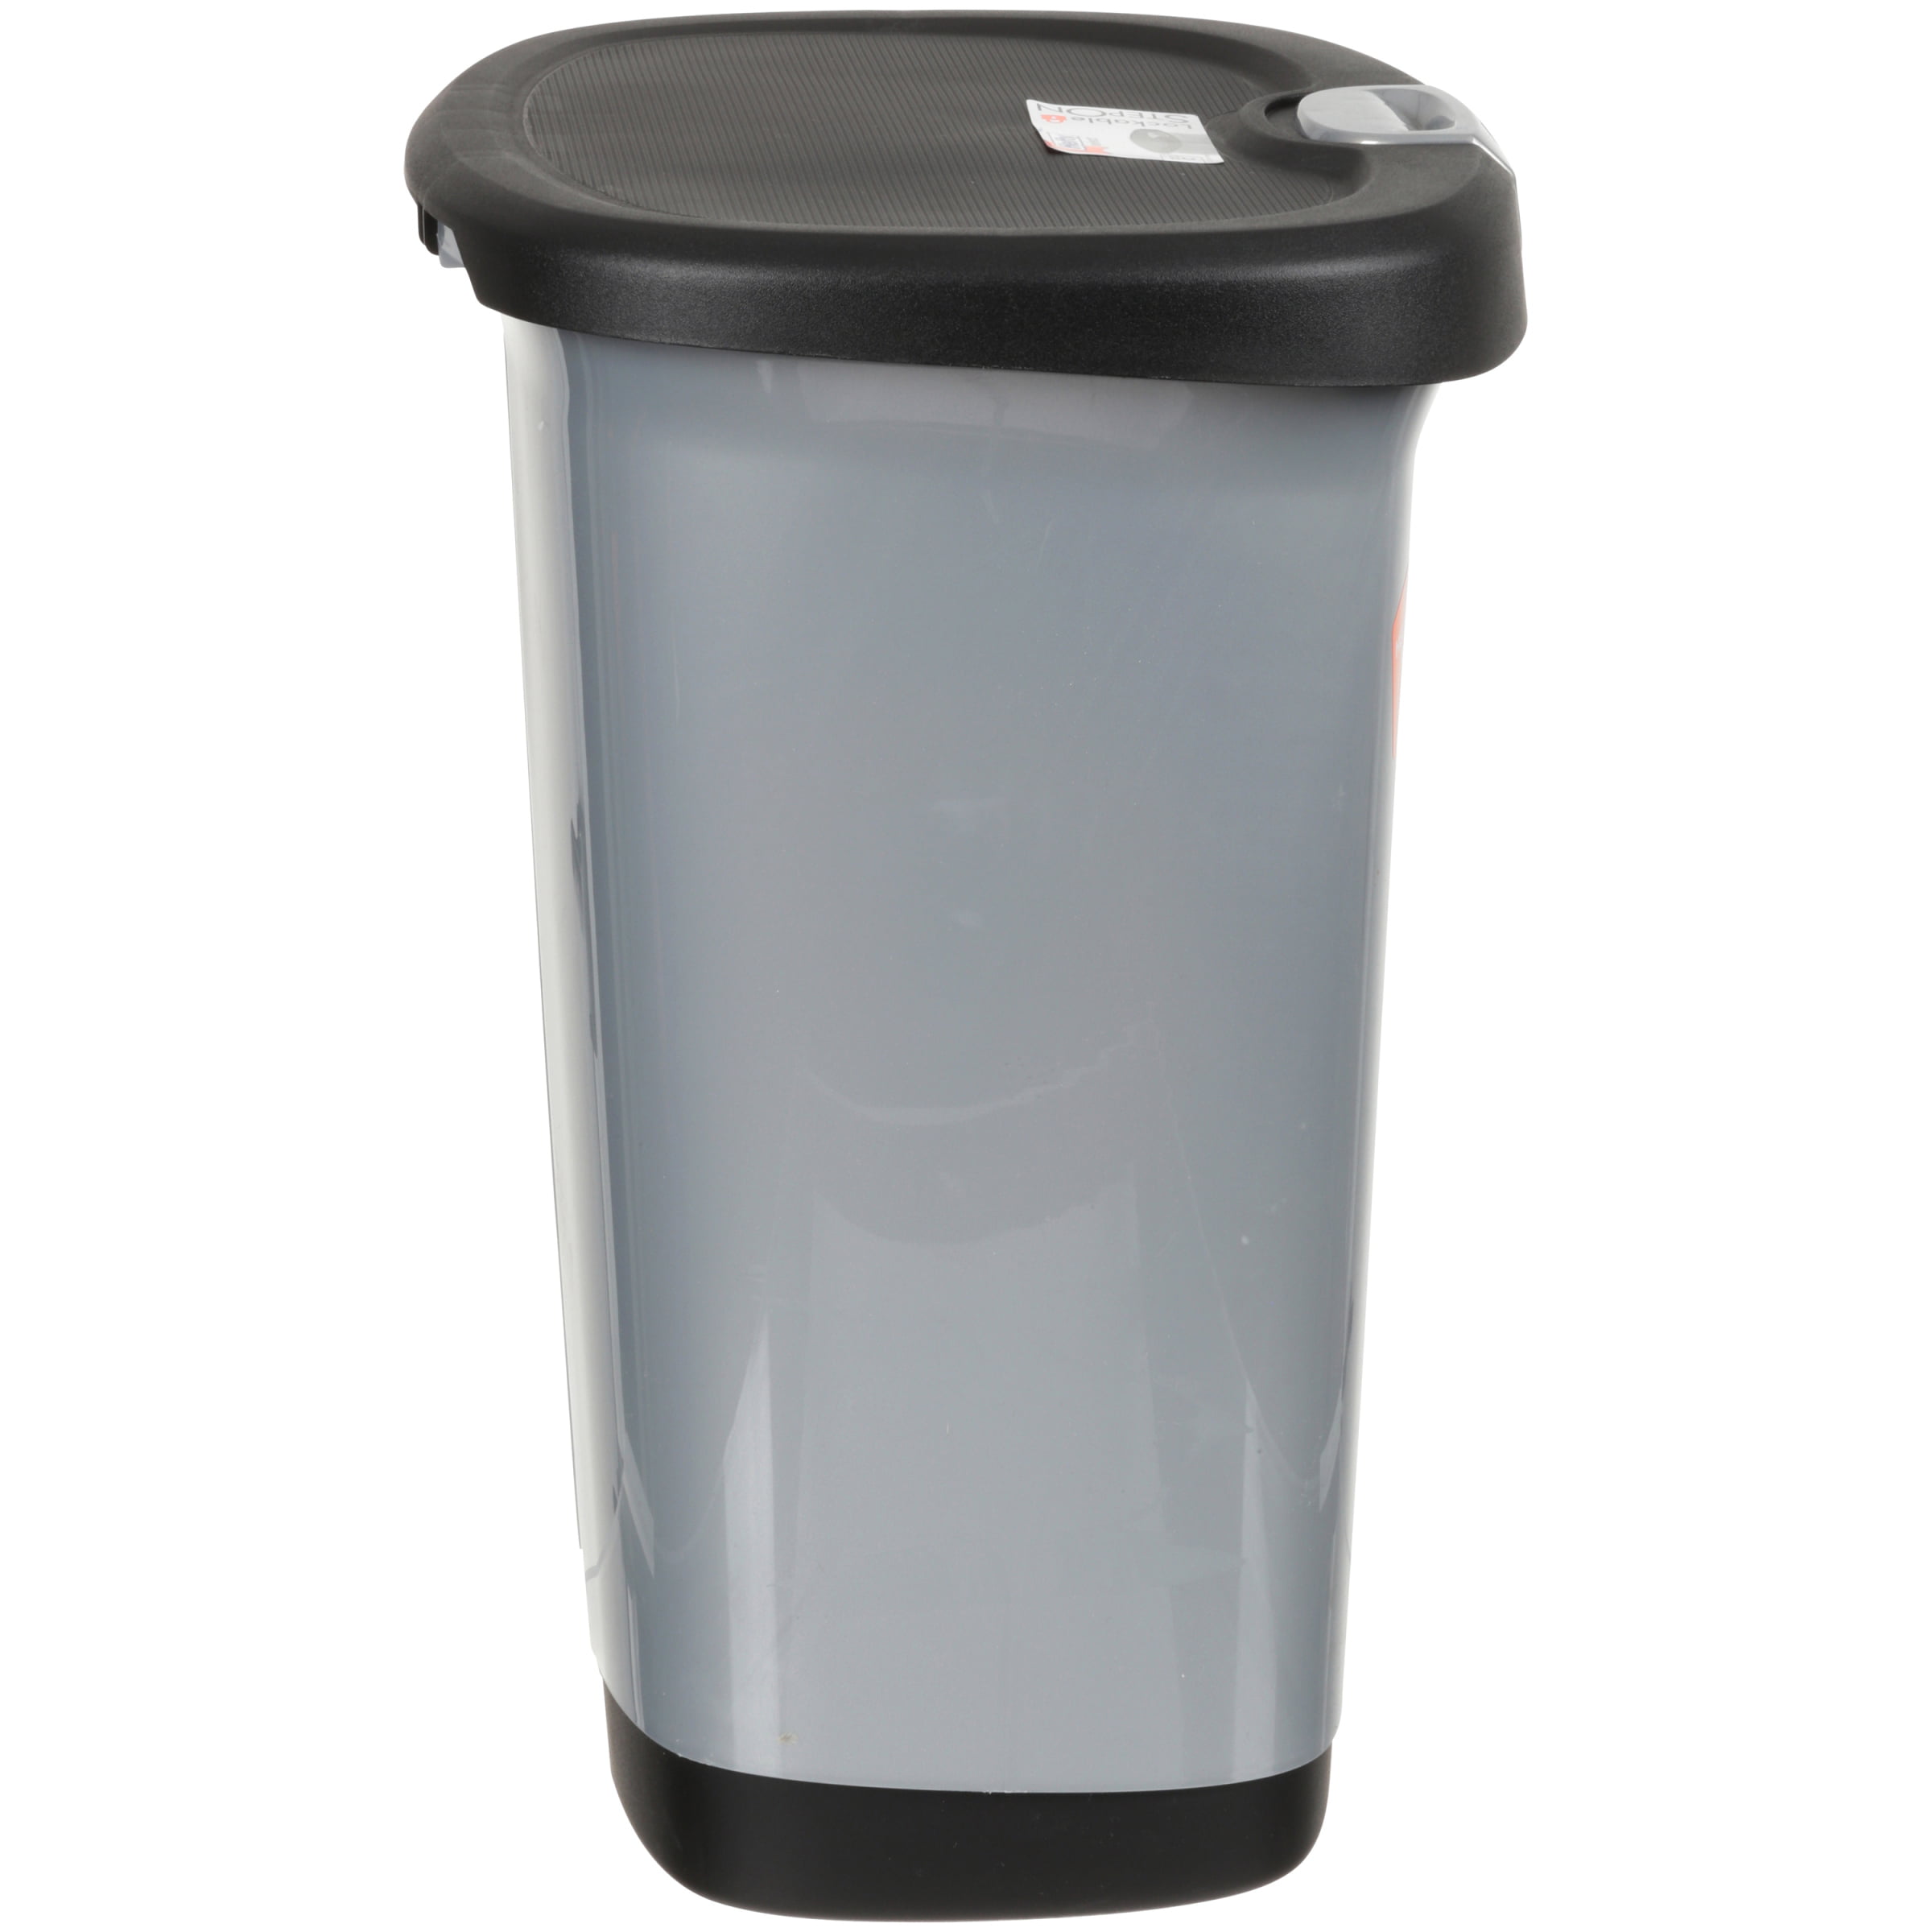 Hefty 7 Gallon Textured Step On Trash Can With Lid Lock And Bottom Cap Multiple Colors Walmart Com Walmart Com